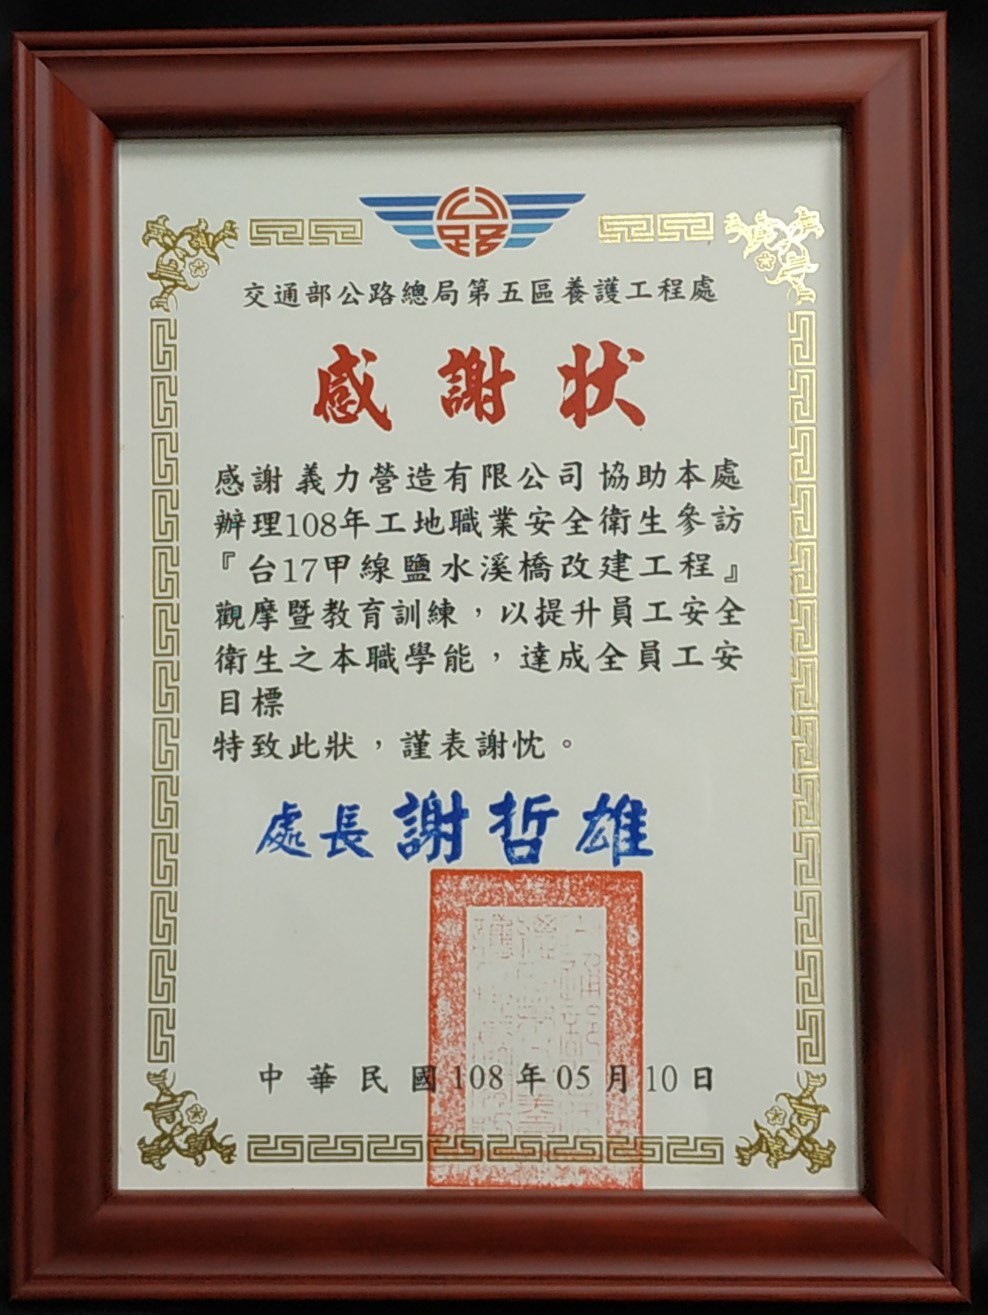 Certificate of Appreciation, Fifth Maintenance Office, Directorate General of Highways, 2019